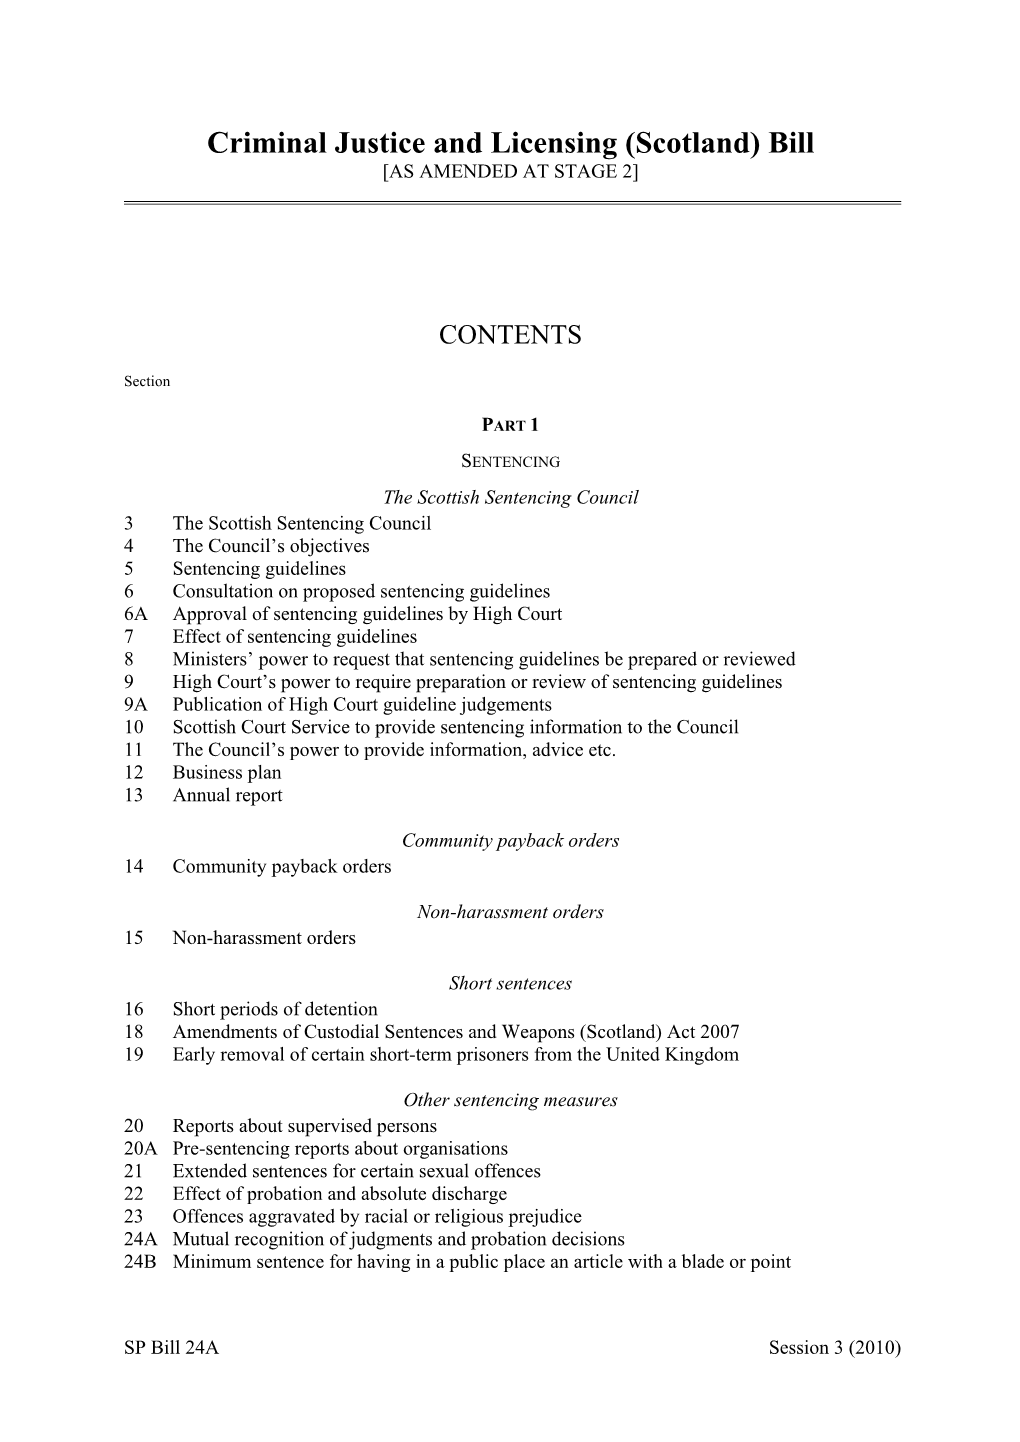 Criminal Justice and Licensing (Scotland) Bill [AS AMENDED at STAGE 2]